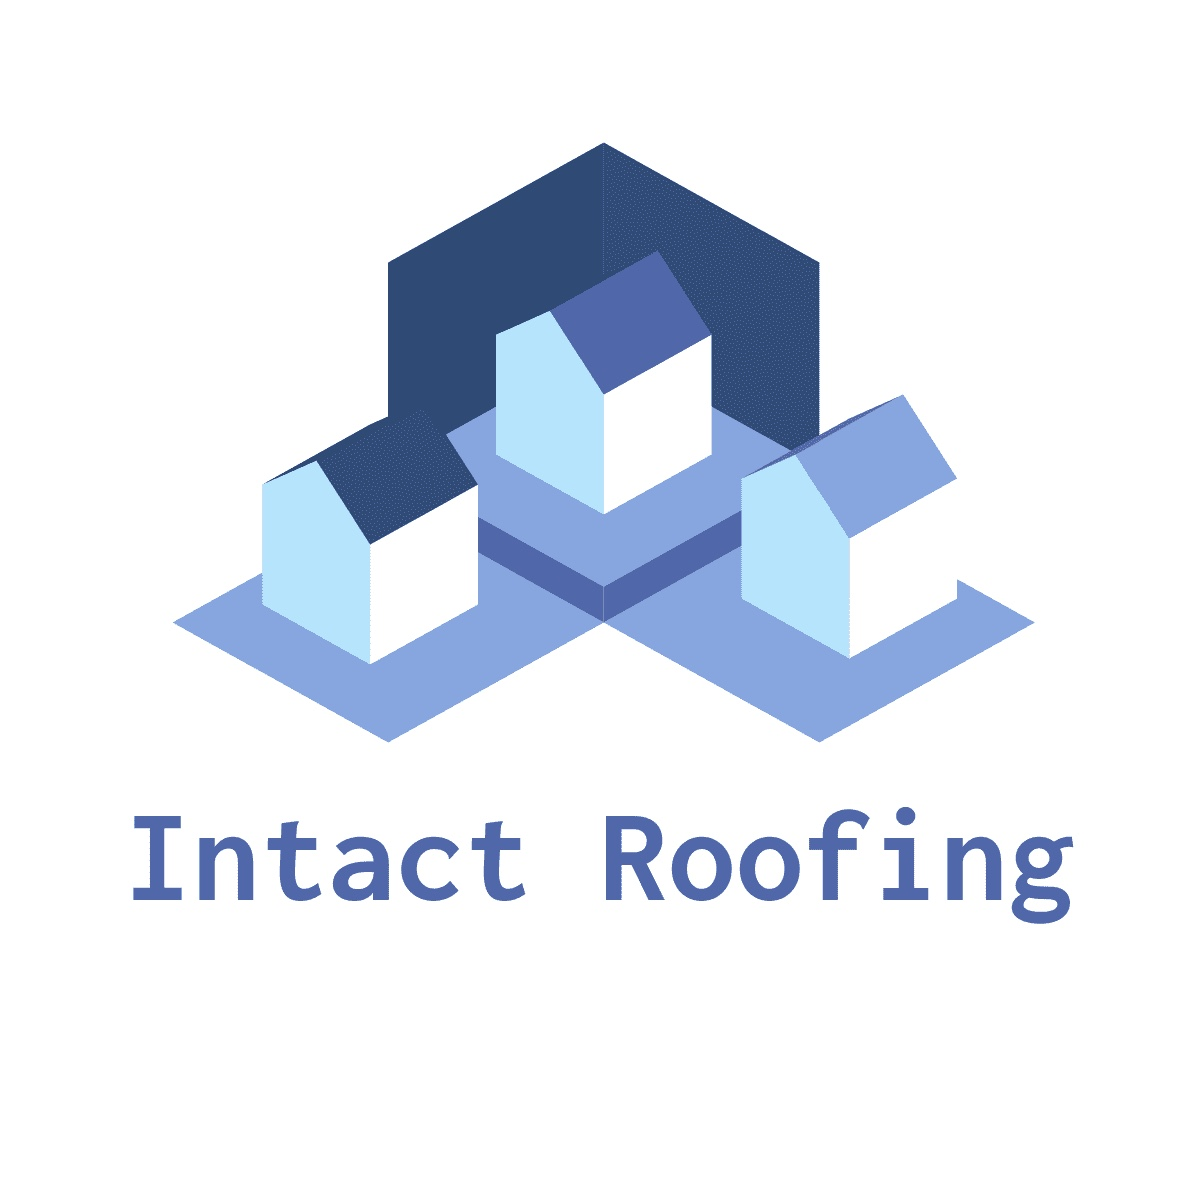 Intact Roofing's logo